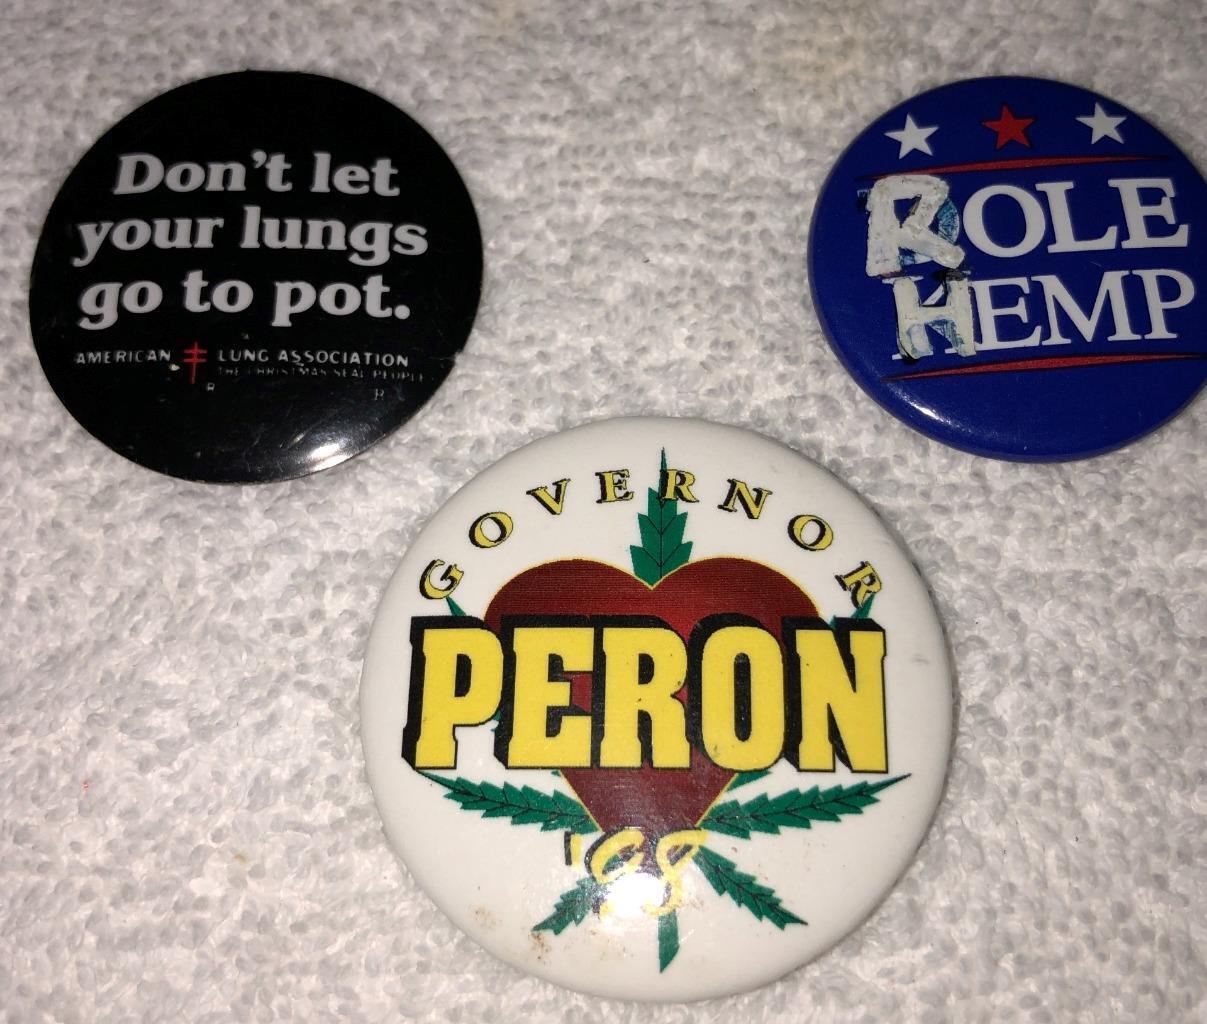 Lot of 3 Cannabis Related Pins- Governor Peron \'98, Role Hemp, Lungs to Pot